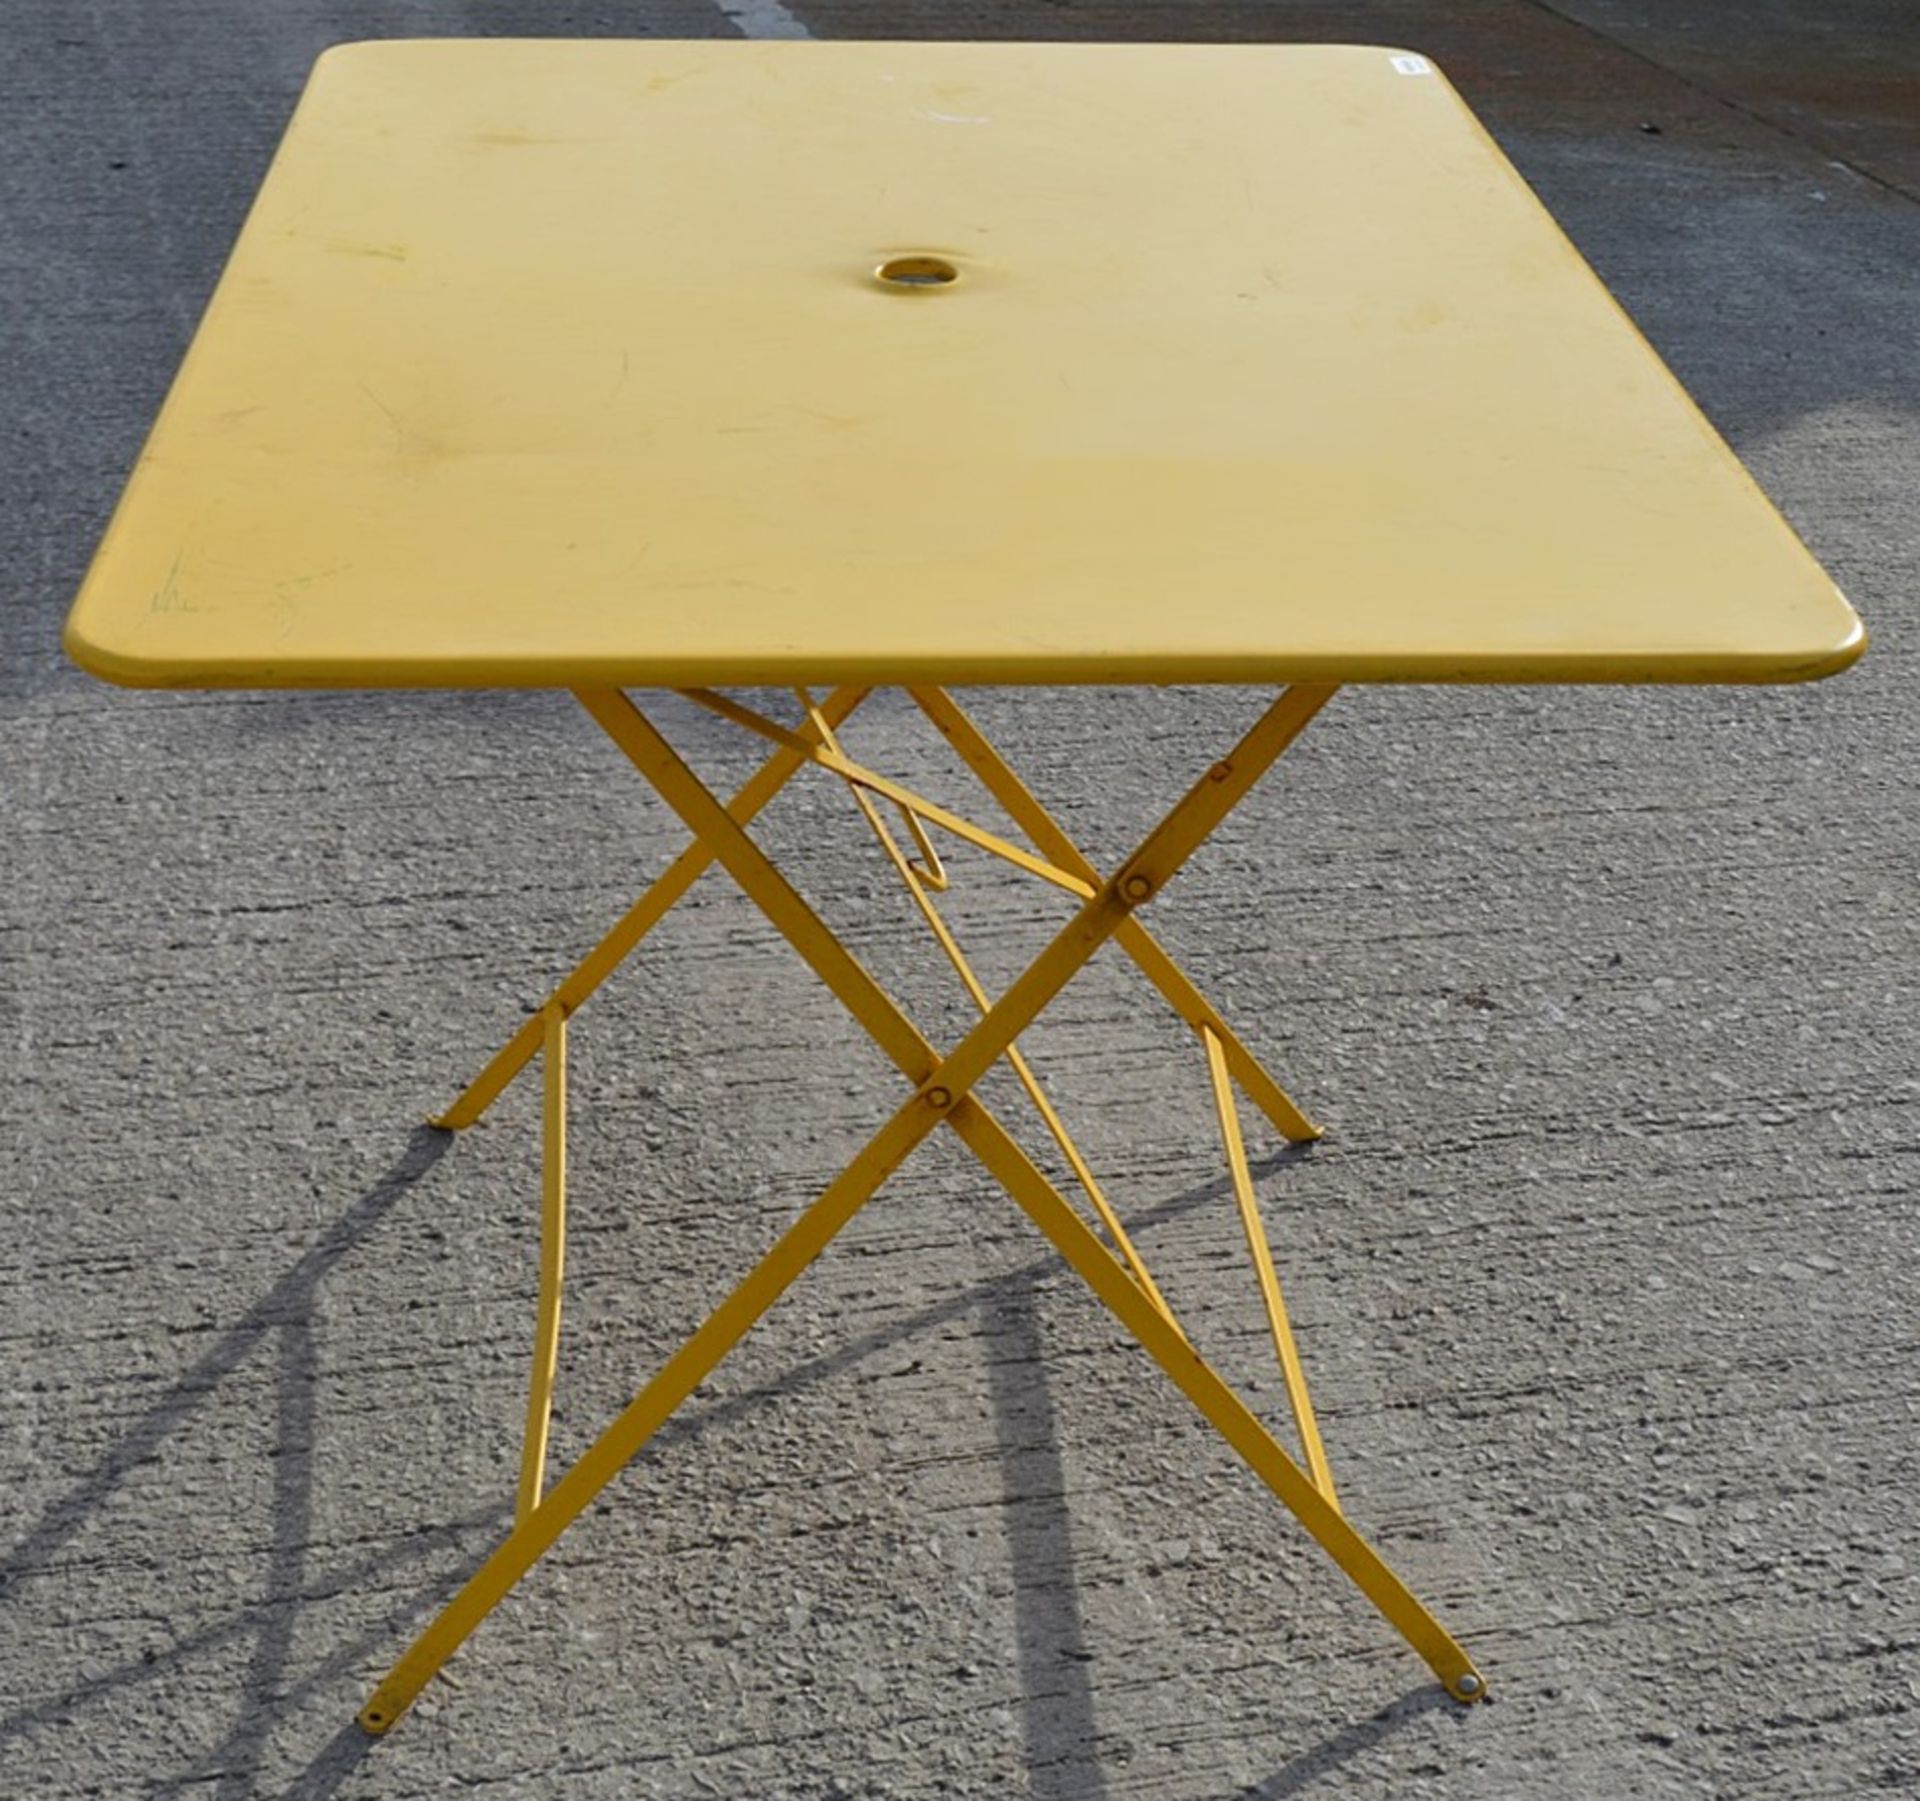 1 x Rustic Metal Folding Commercial Bistro Table In Bright Yellow - Made In France - Dimensions: - Image 3 of 3